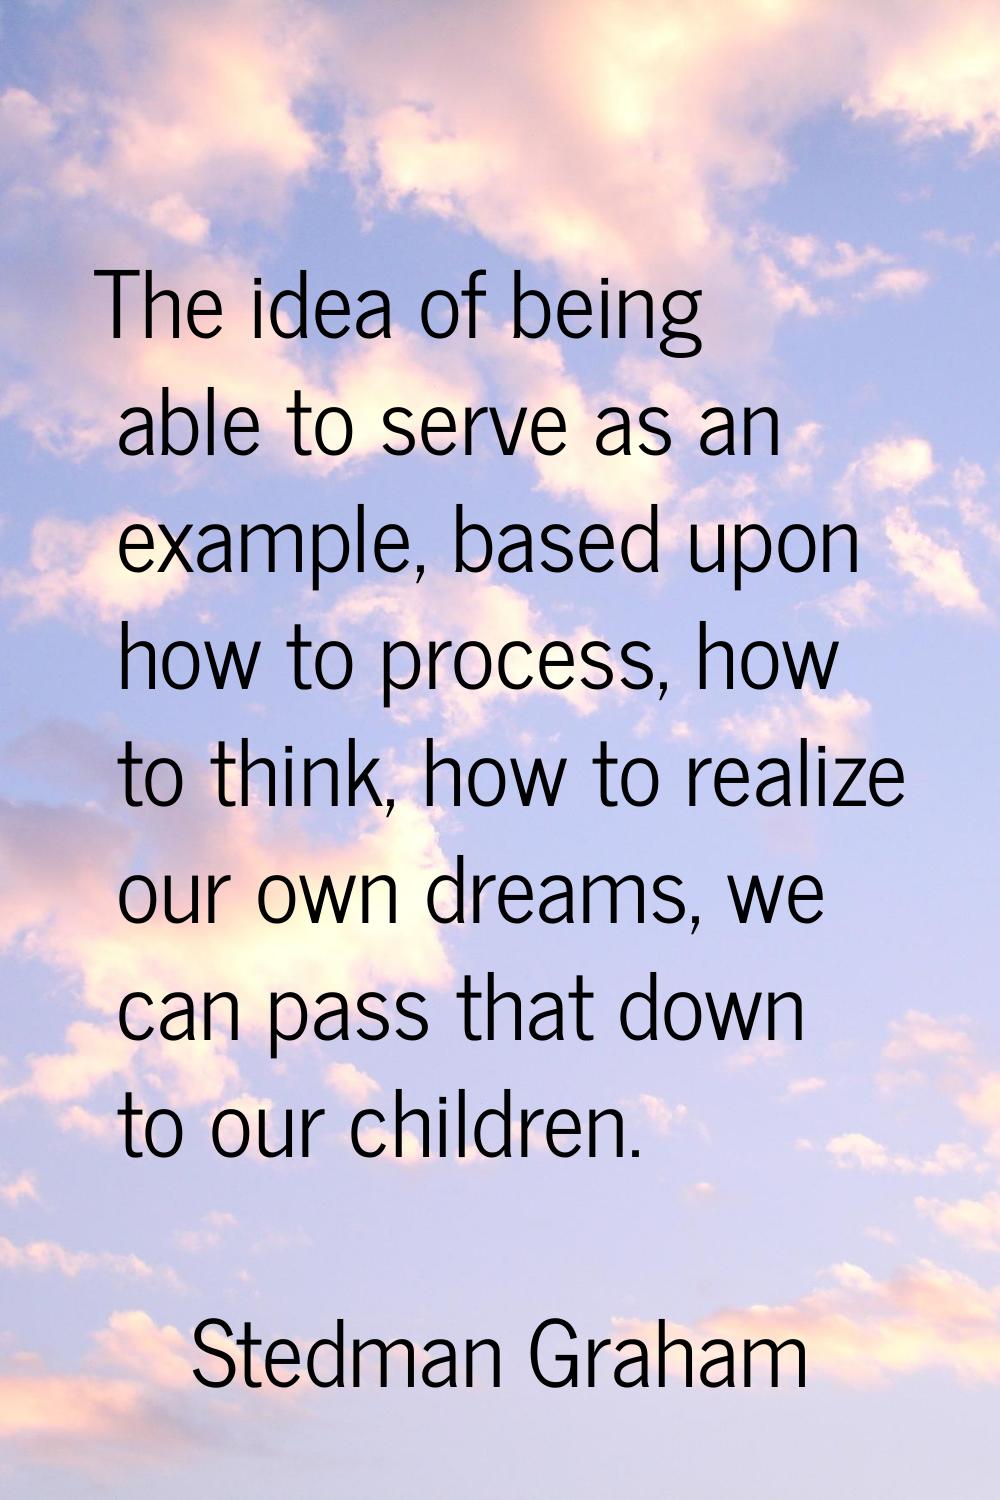 The idea of being able to serve as an example, based upon how to process, how to think, how to real